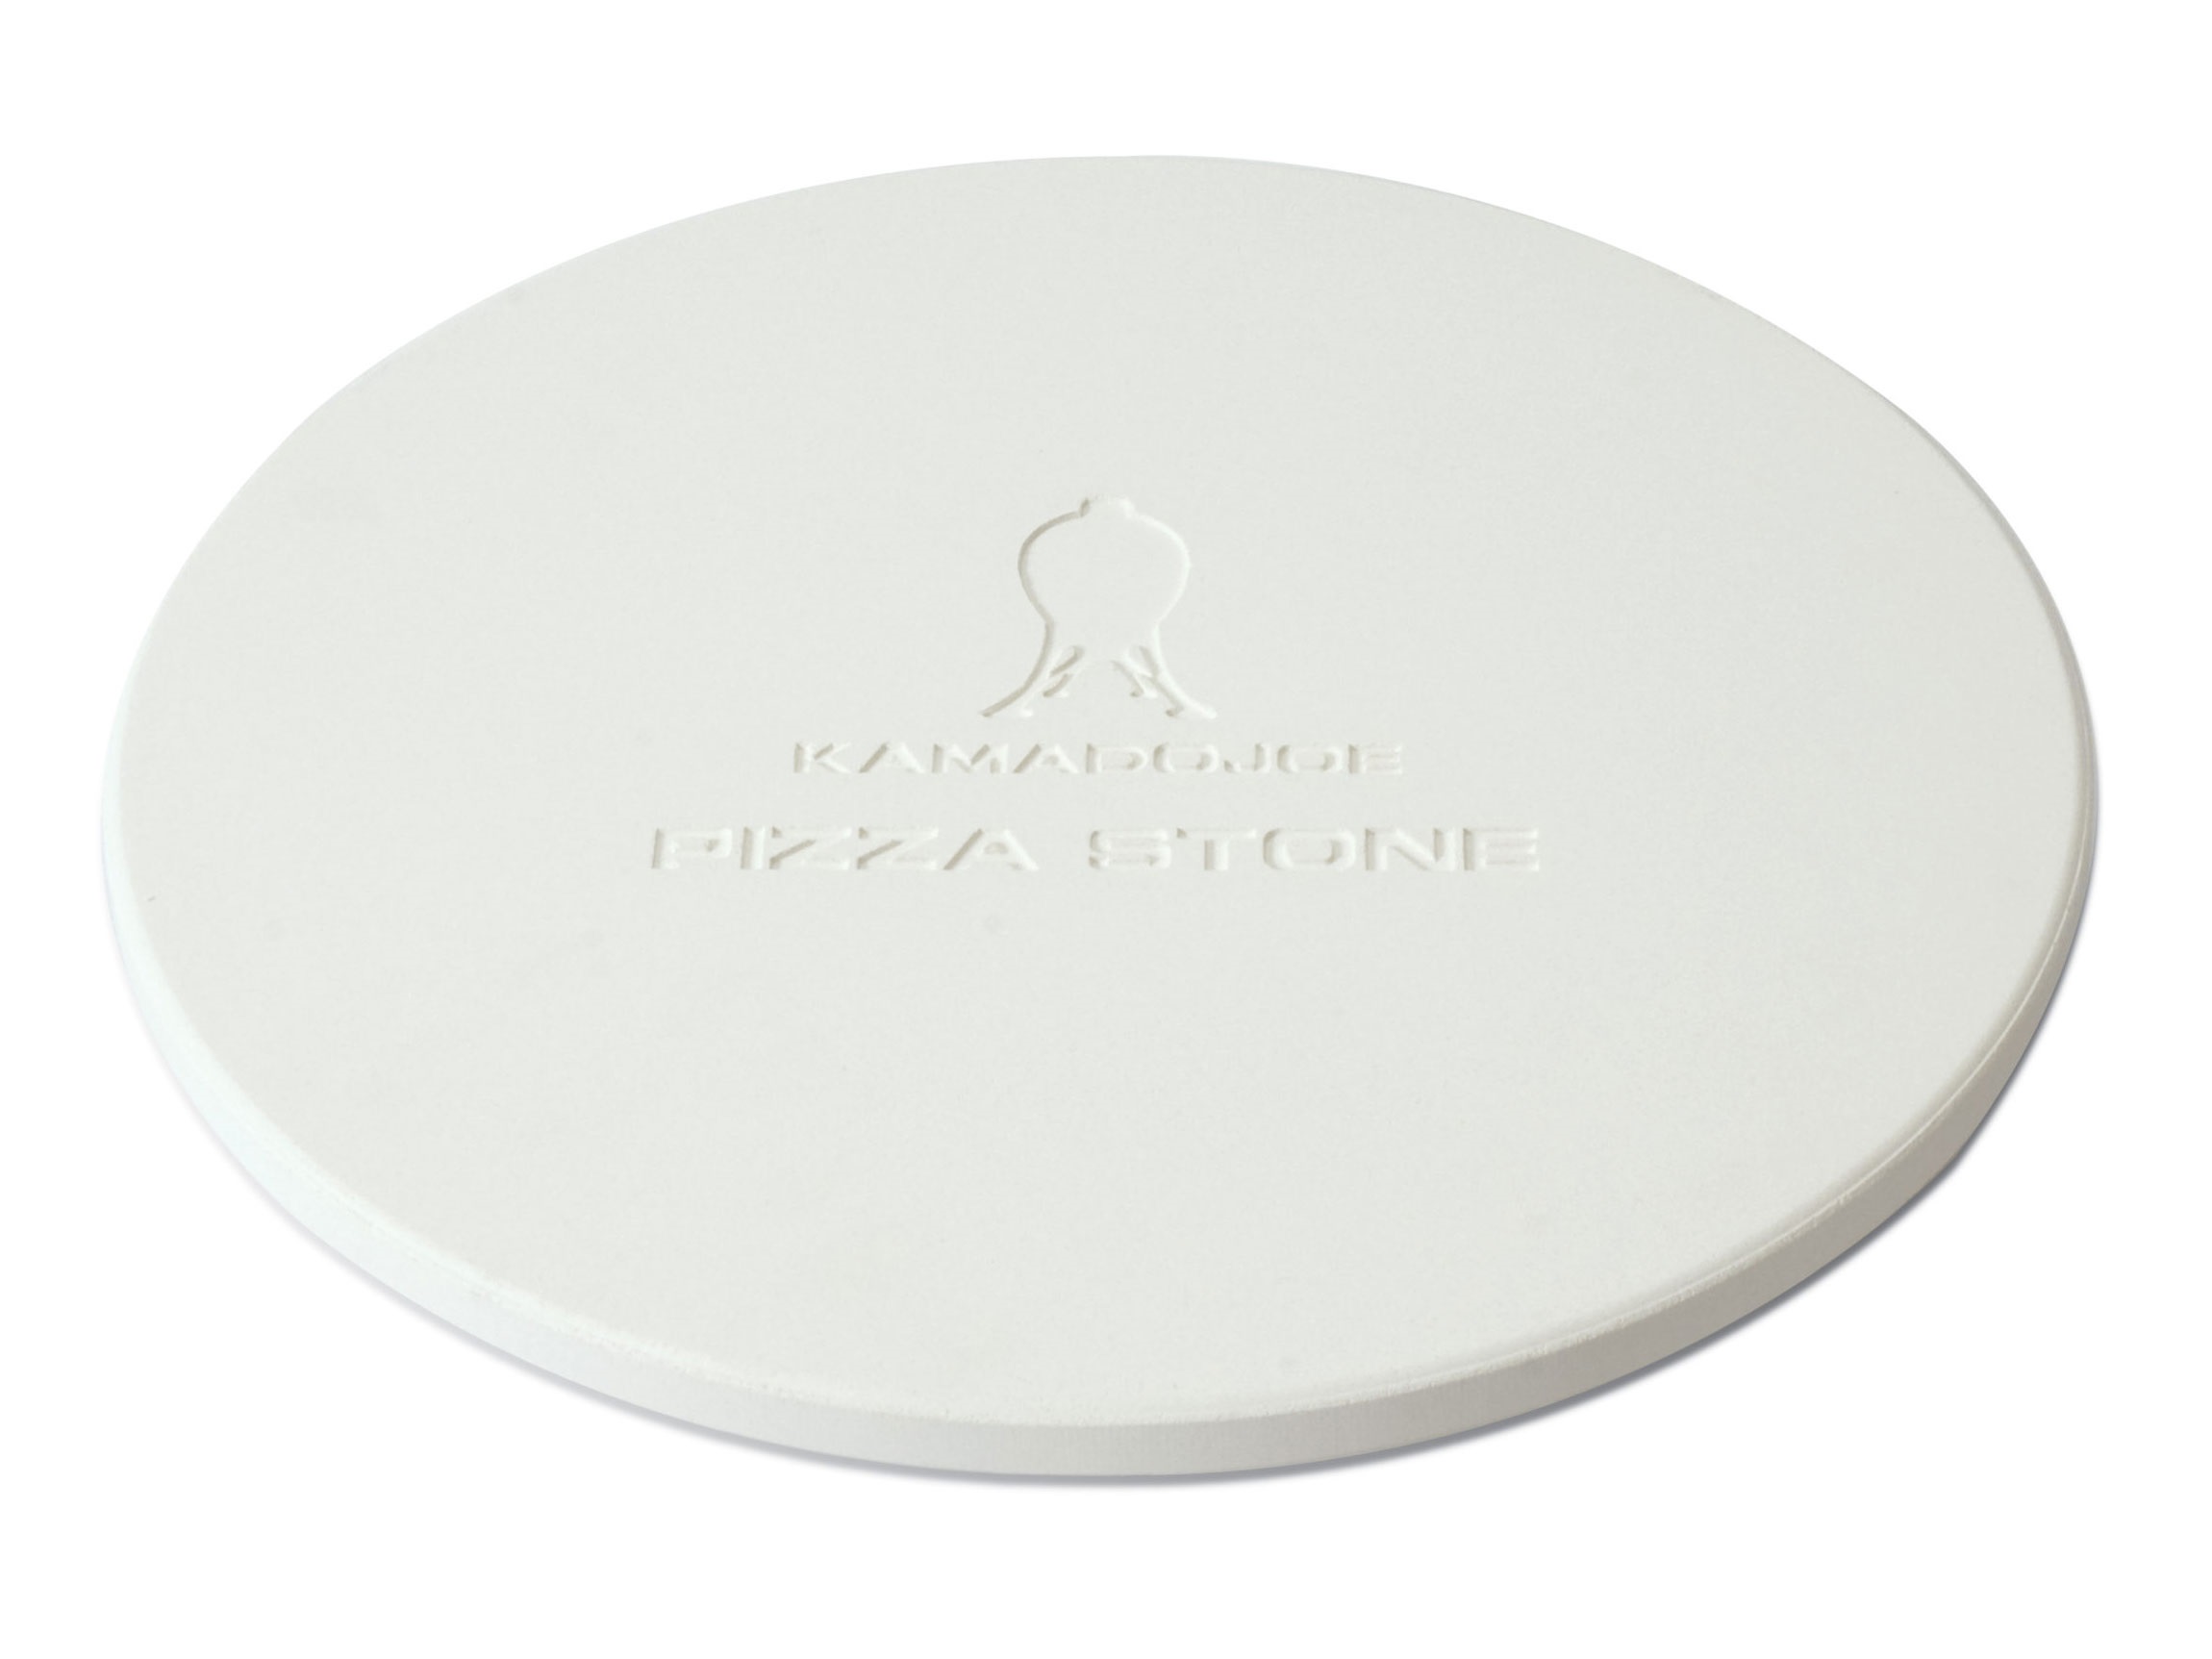 Ceramic Pizza Stone that fits 18" Kamado BBQ, pizza ovens and outdoor kitchens sold in NZ